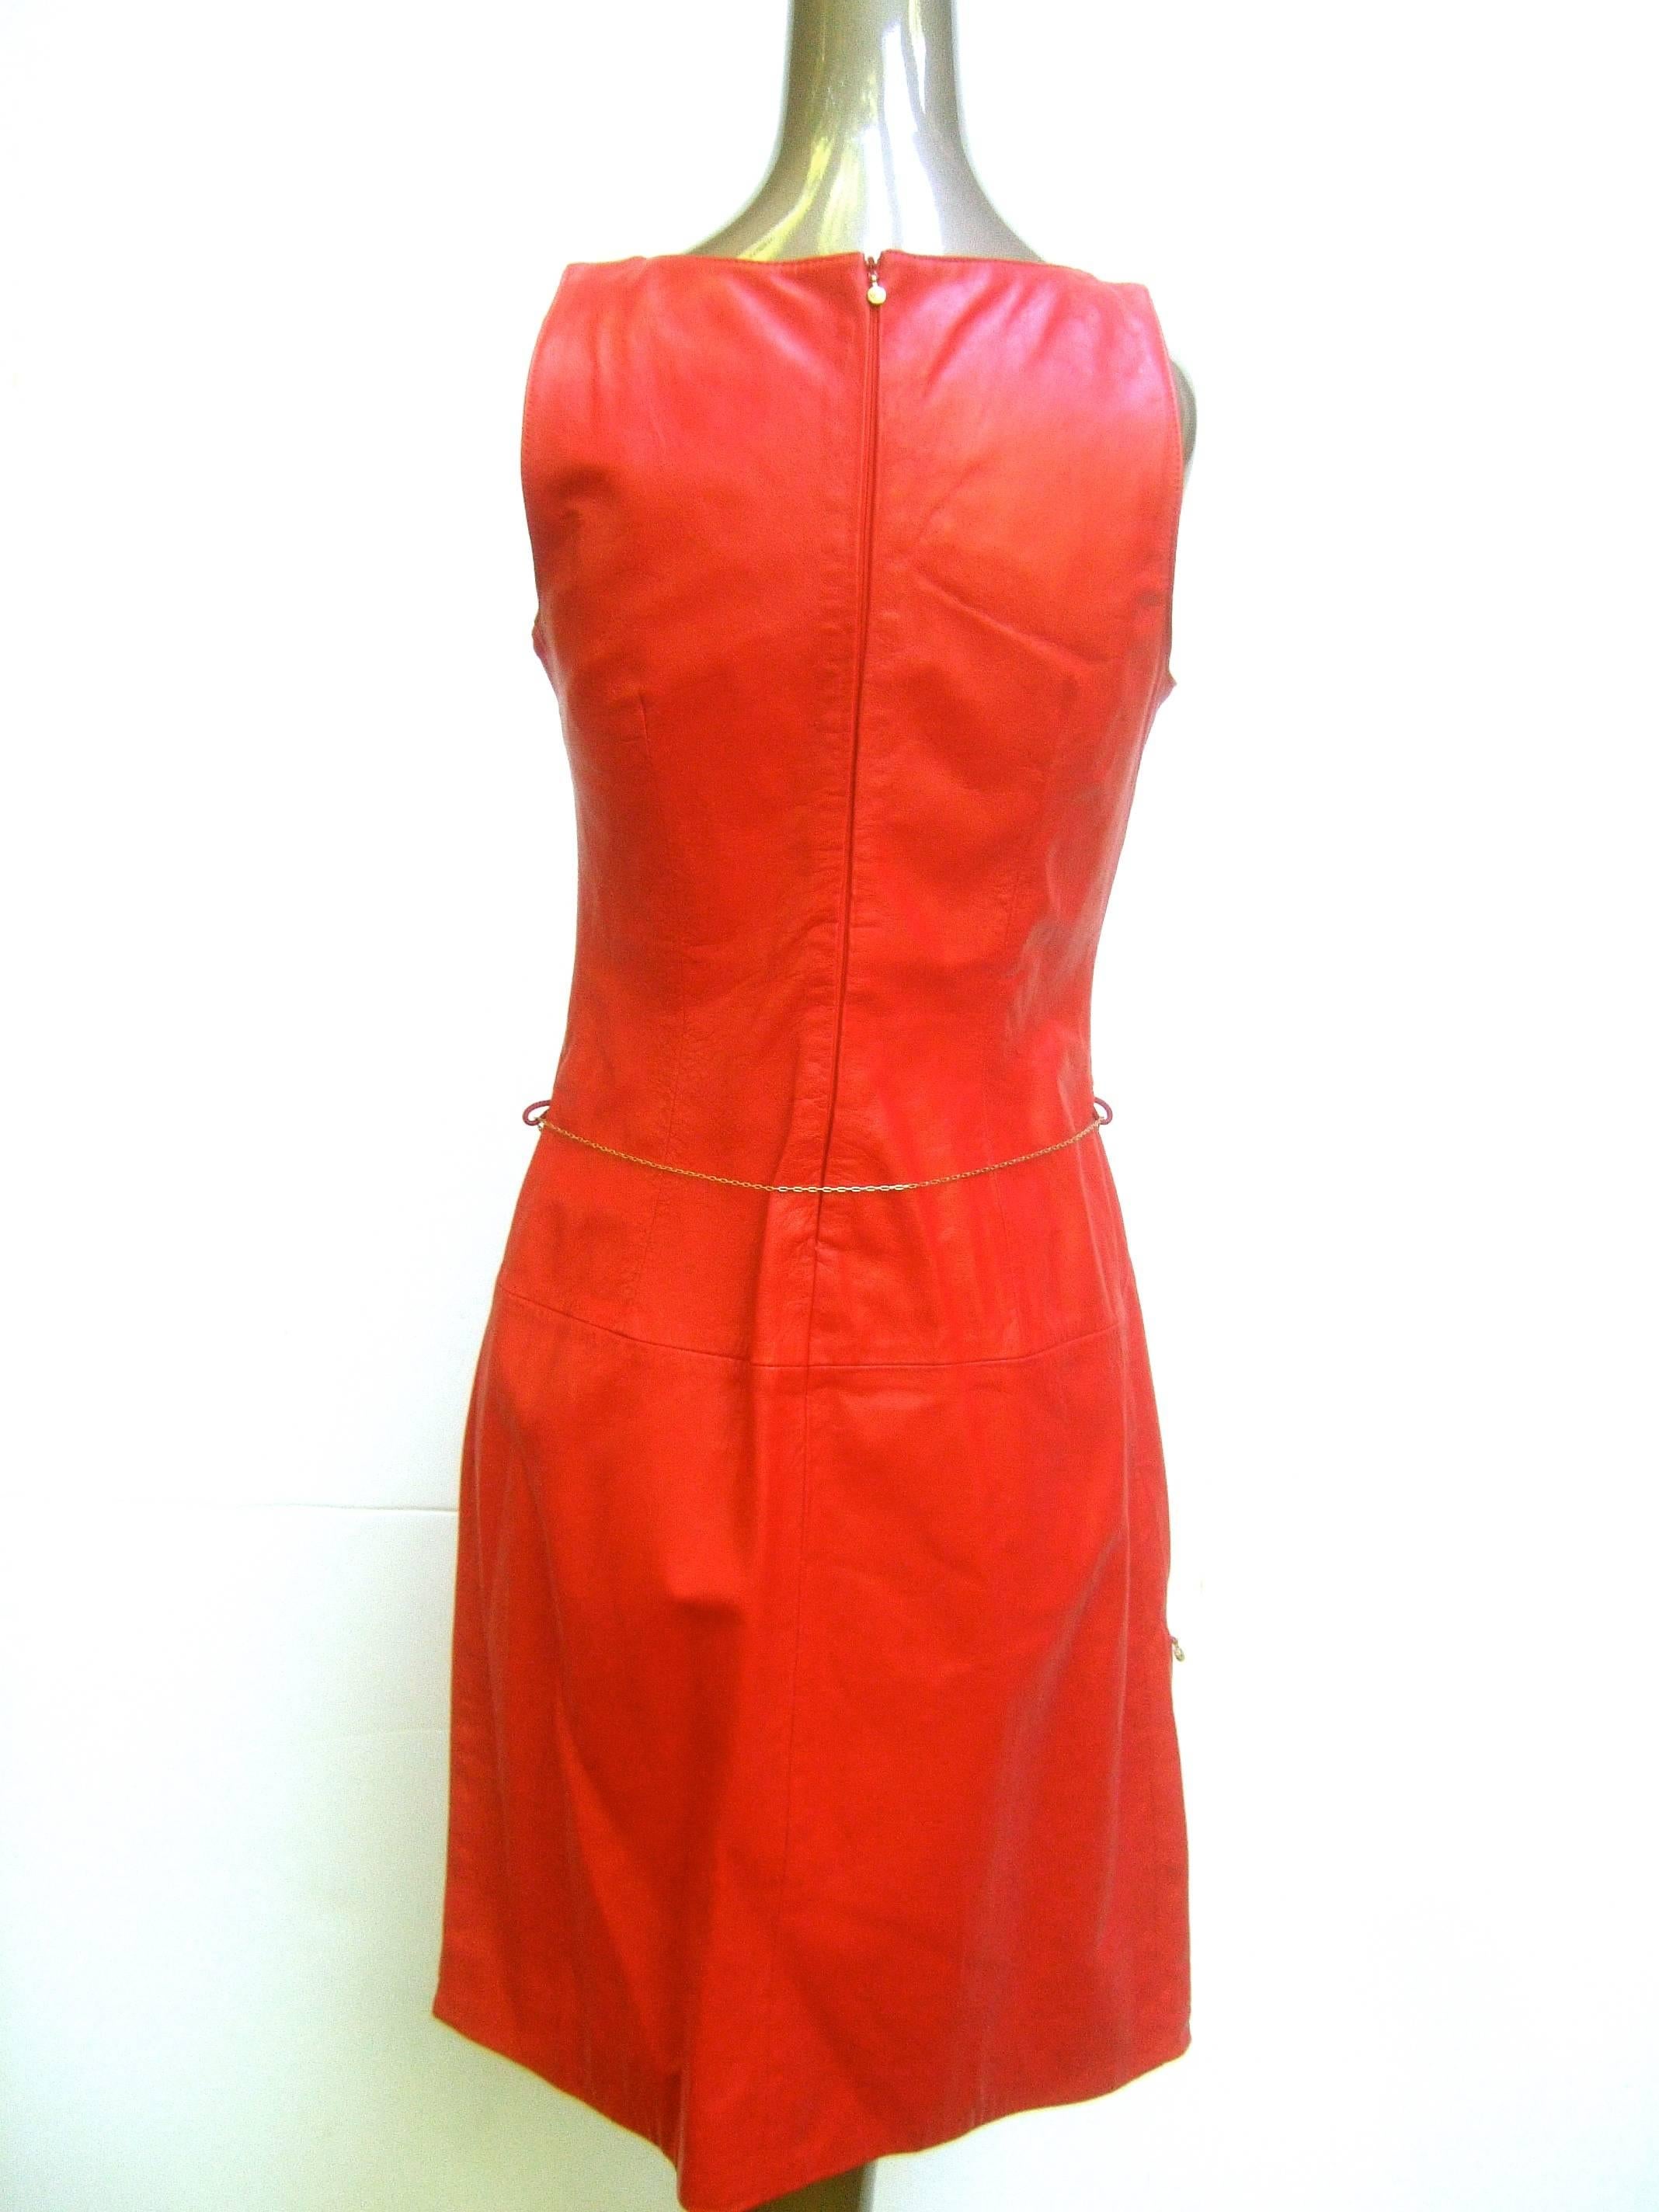 Versace Cherry Red Leather Dress with Gilt Belt. For Sale 3